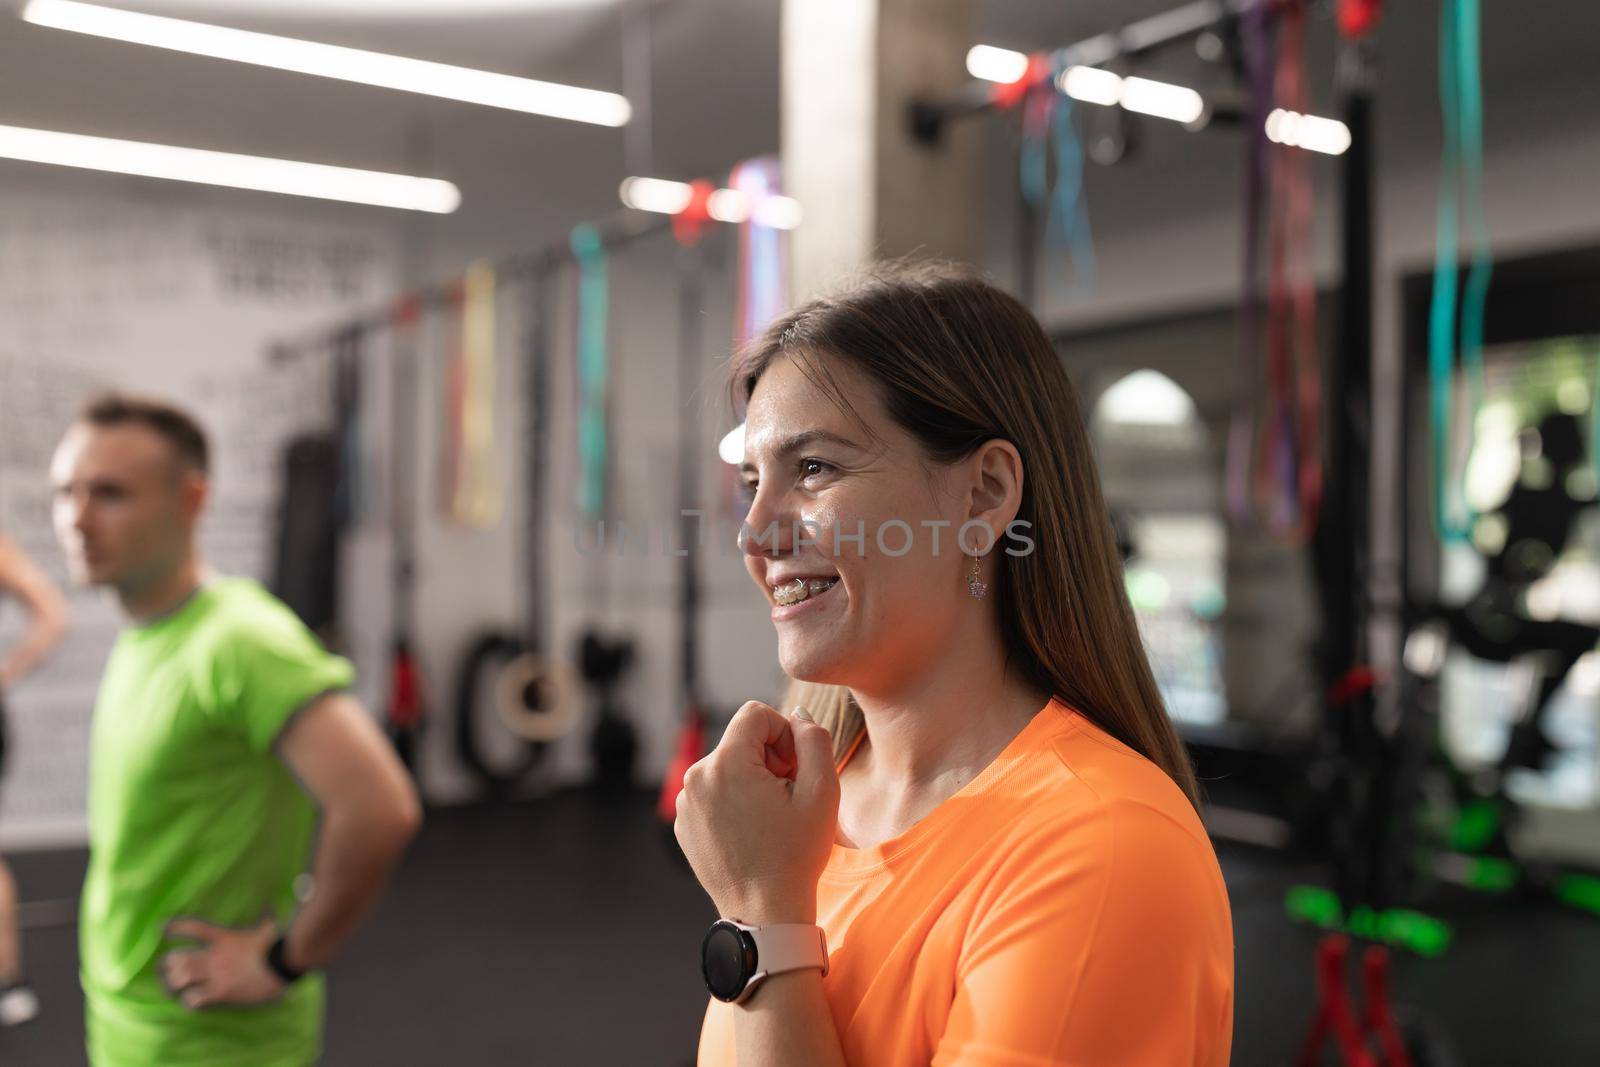 Portrait of a female trainee smiling and placing her wrostwatch while resting during a workout at the gym